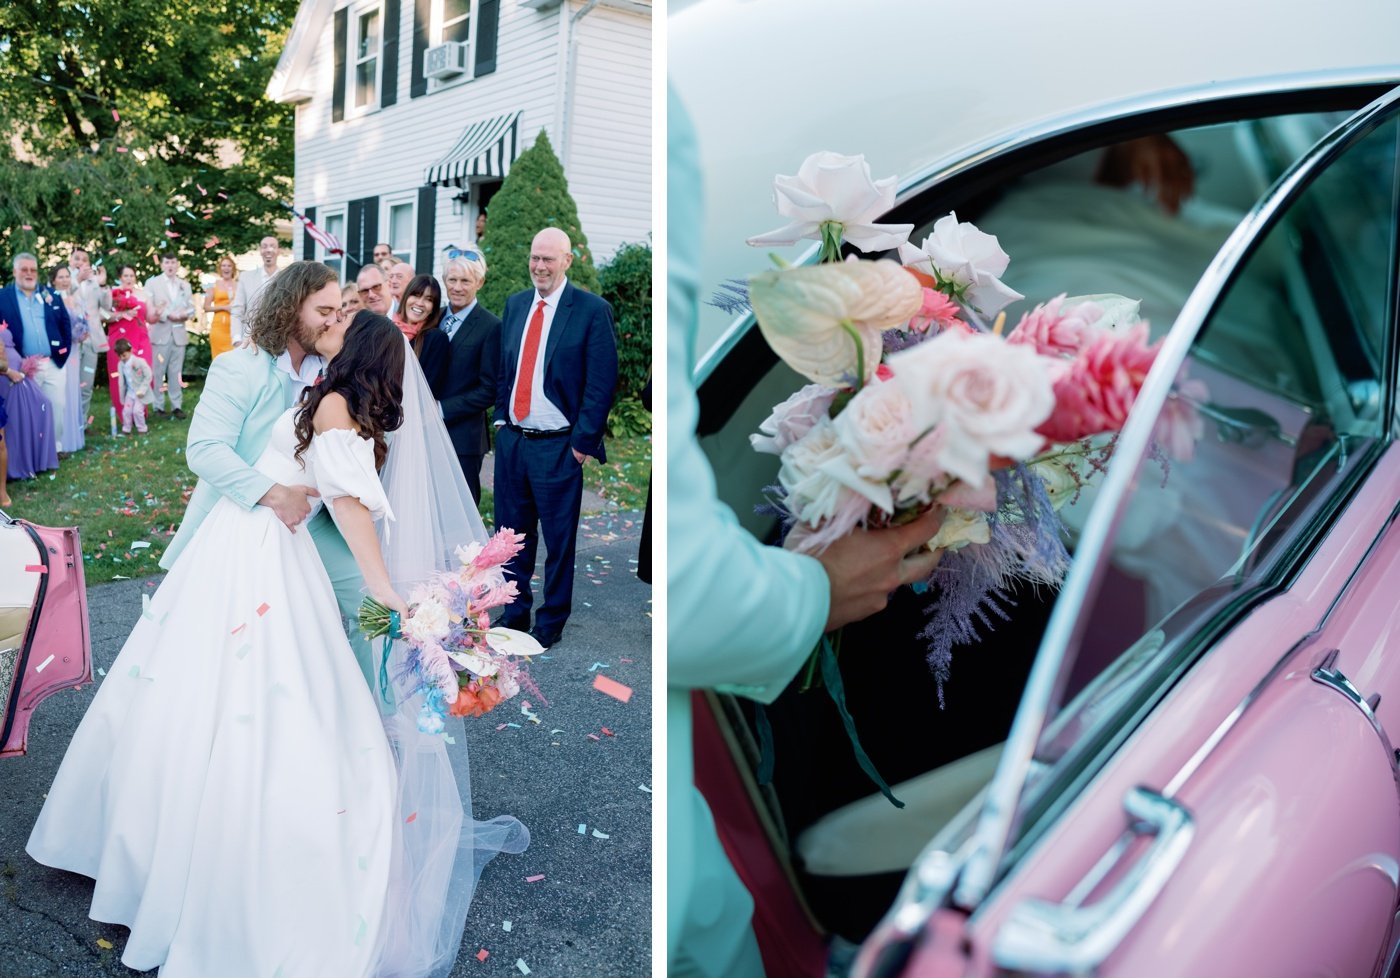 Bride and groom getting into a pink vintage Cadillac after their wedding ceremony